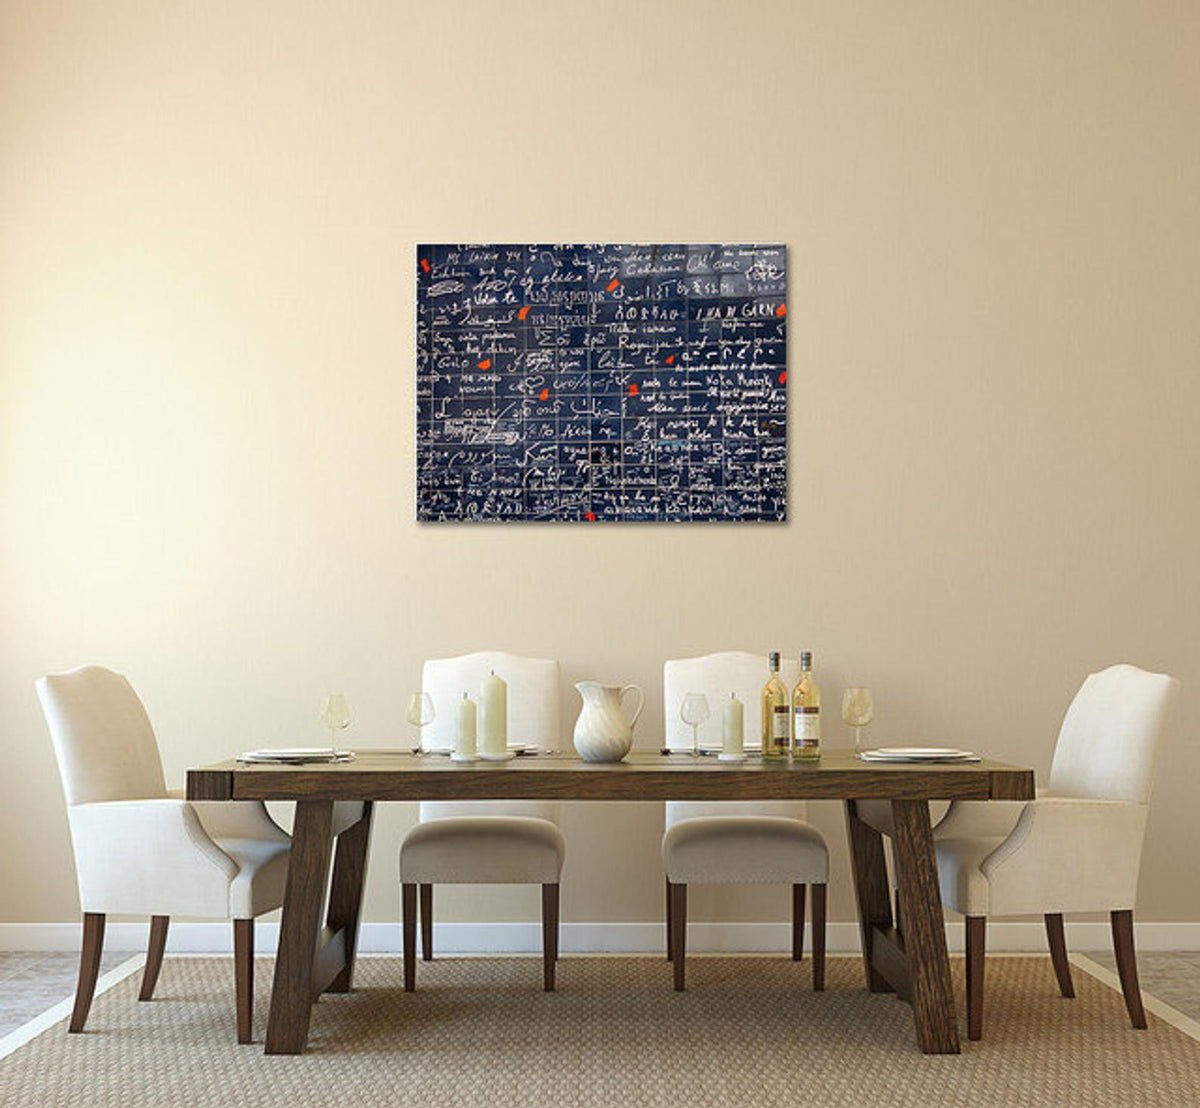 Gallery Wrap Canvas - Every Day Paris 